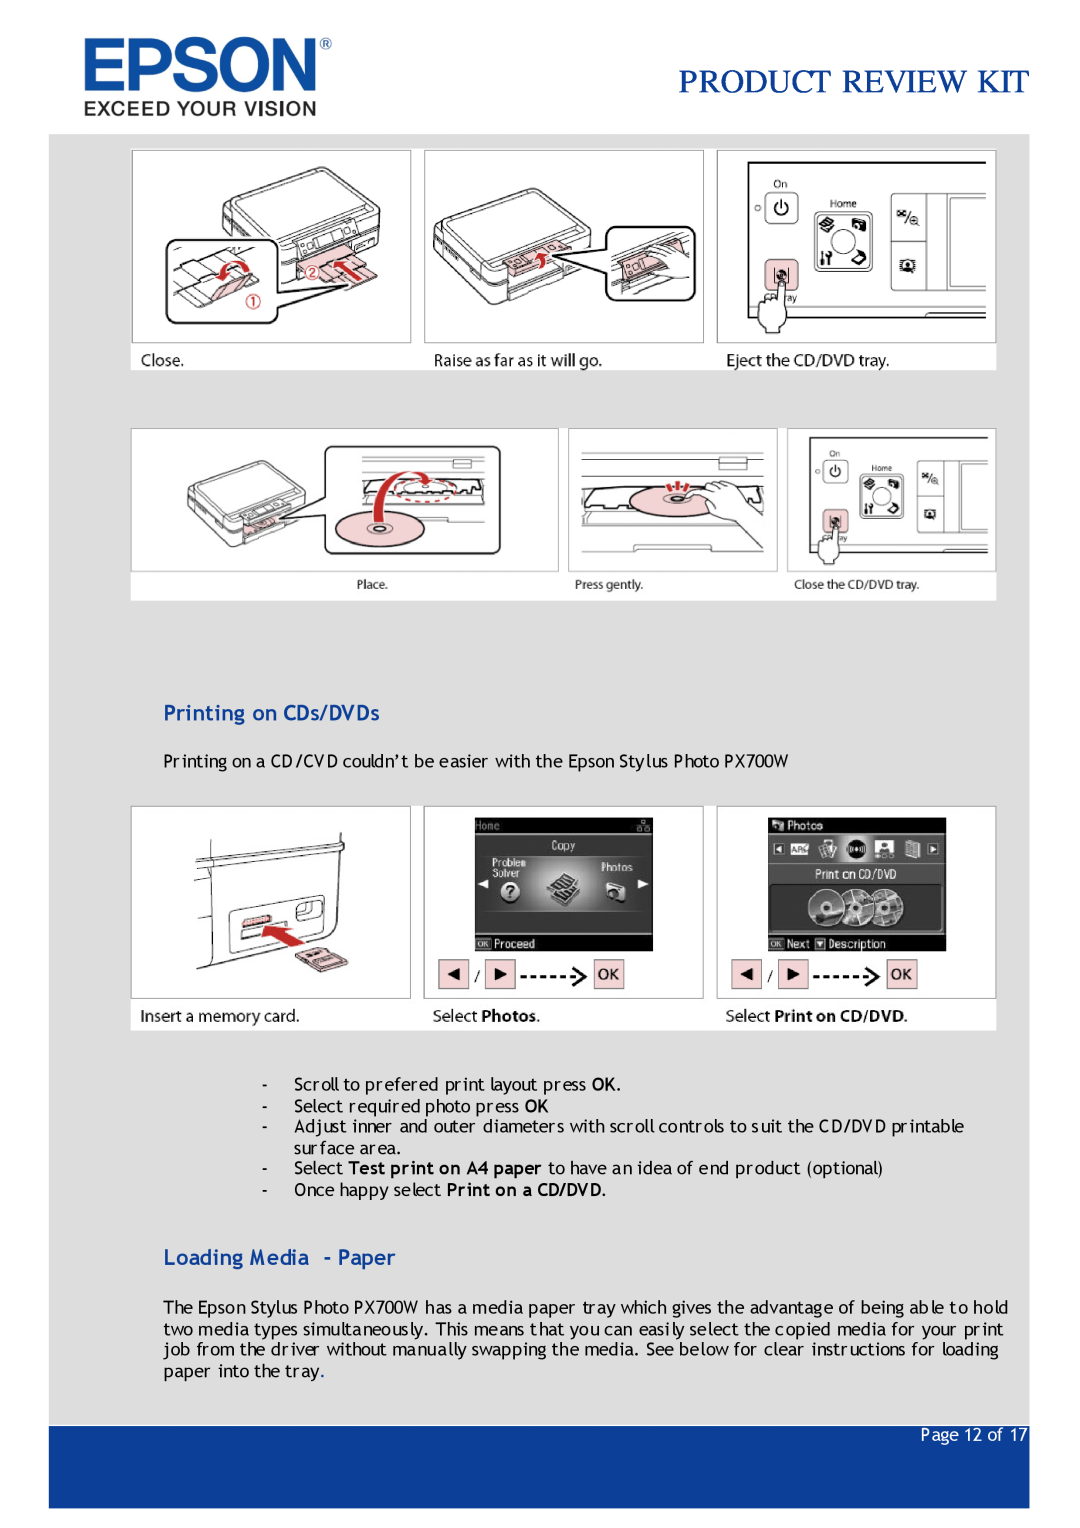 Epson PX700W specifications Printing on CDs/DVDs, Loading Media - Paper, Product Review Kit, Page 12 of 